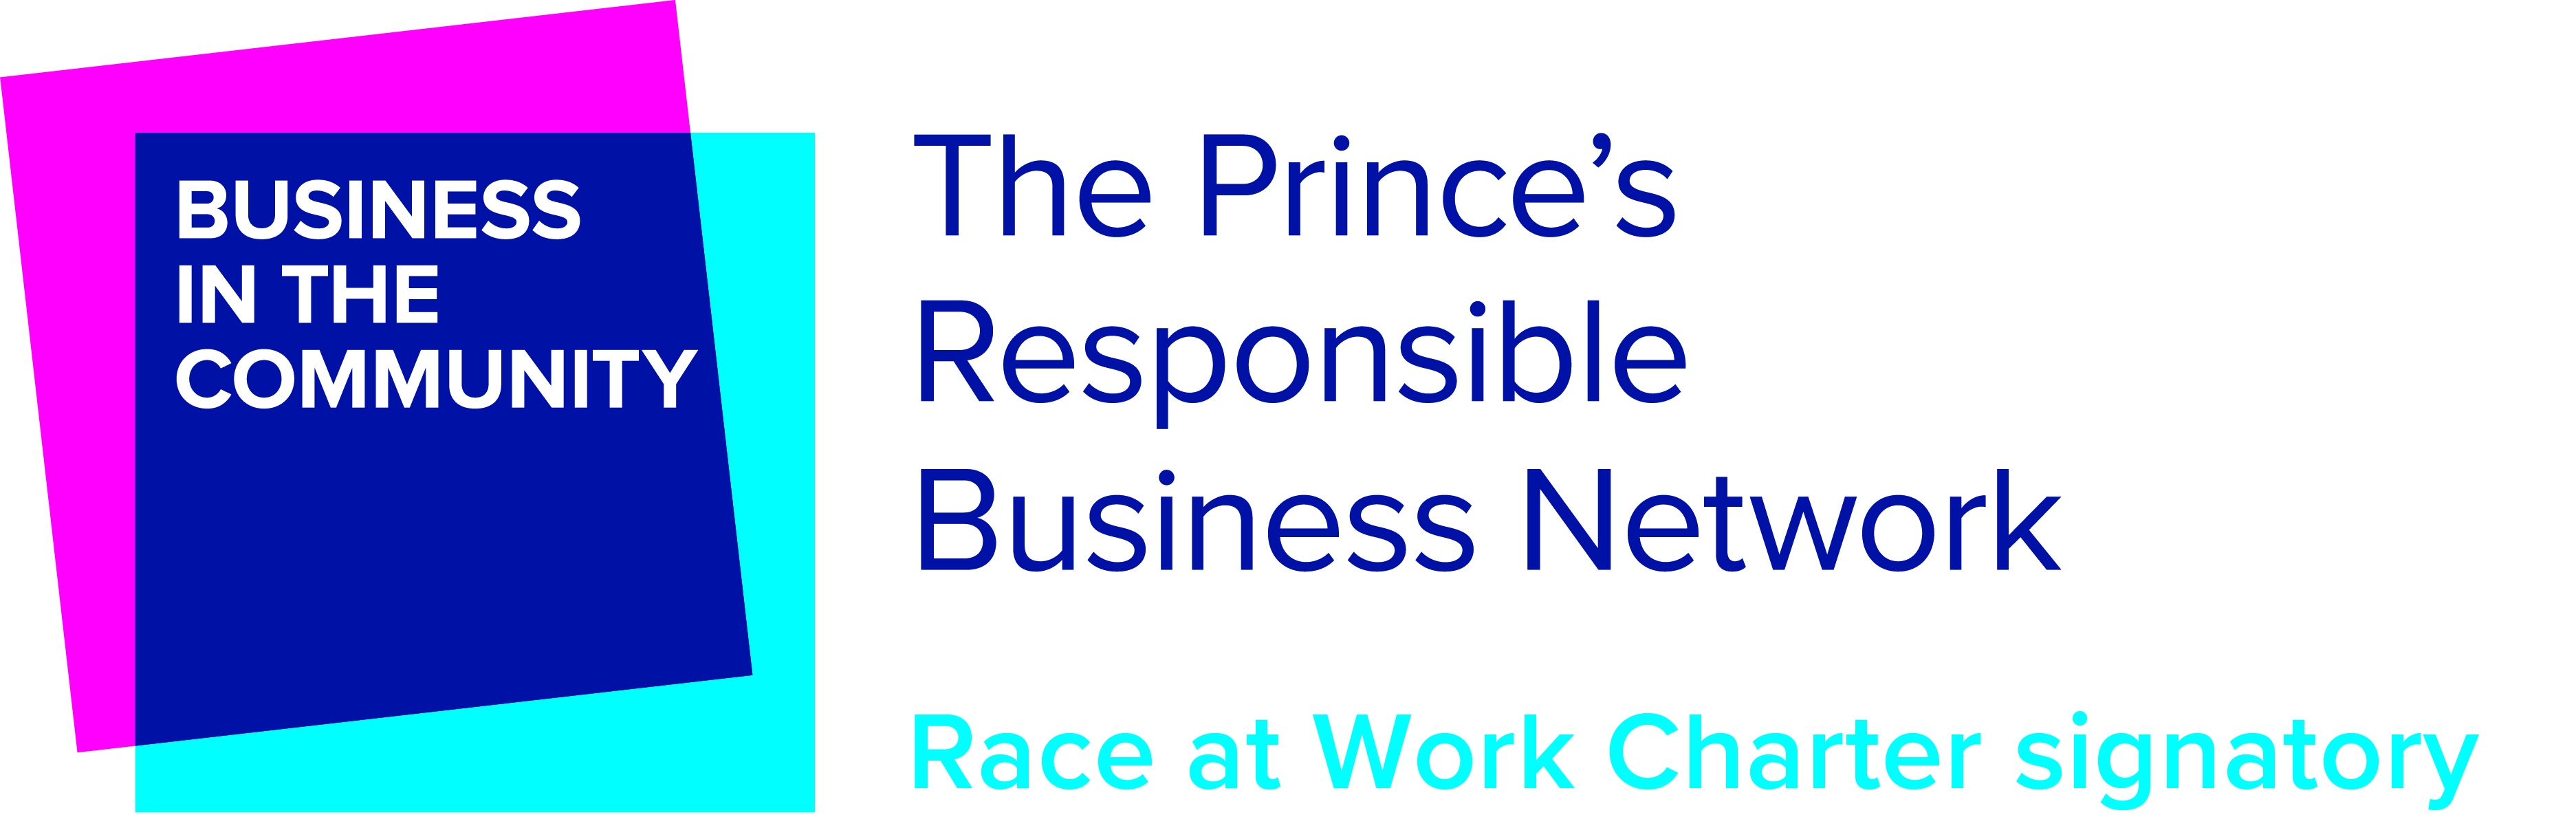 We are part of the 'Prince's Responsible Business network'